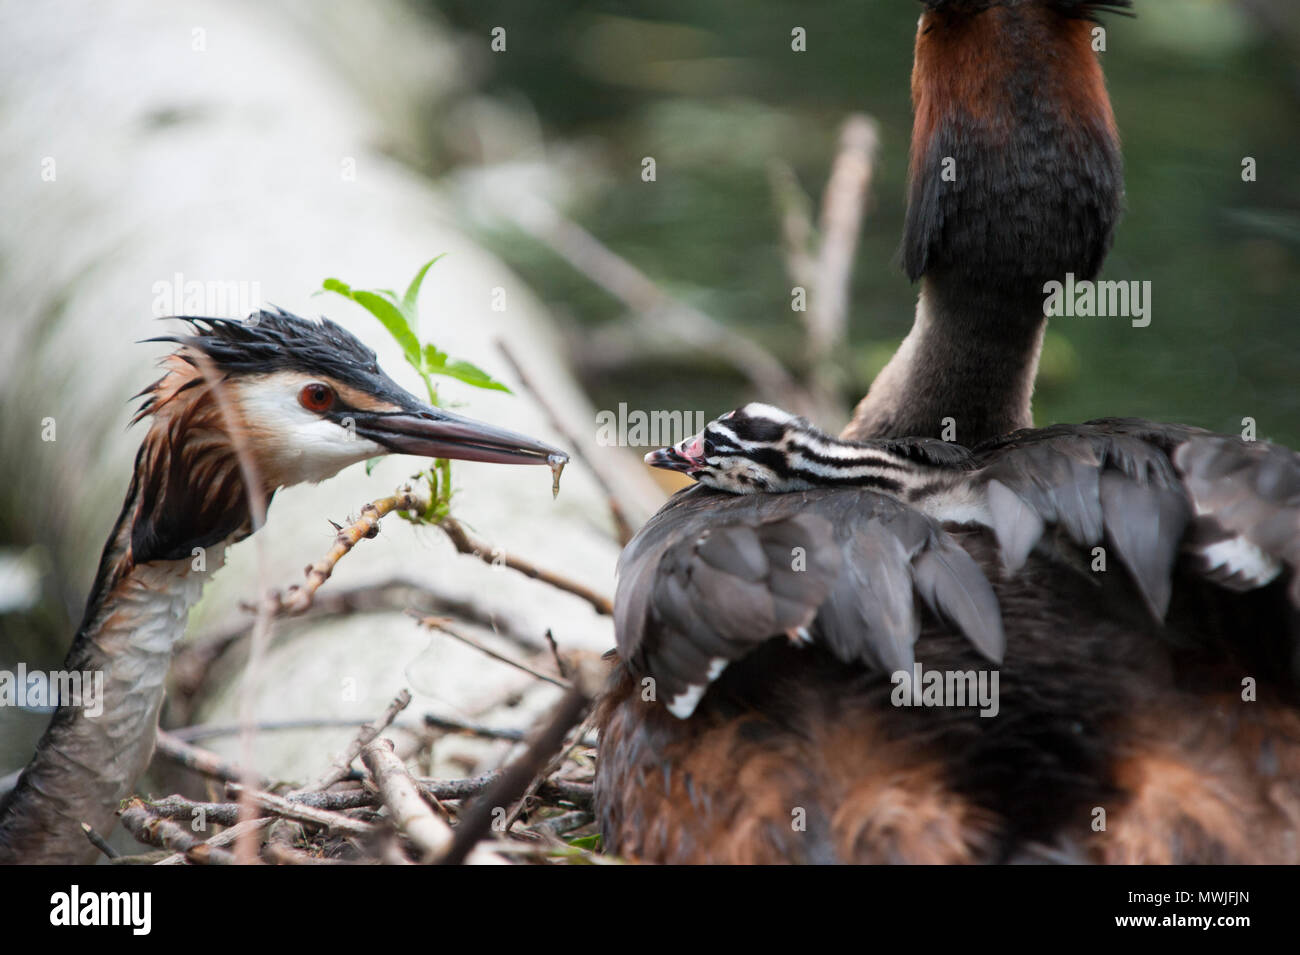 Great Crested Grebe,(Podiceps cristatus),feeding chick on parent's back at nest, Walthamstow Reservoirs, London, United Kingdom Stock Photo